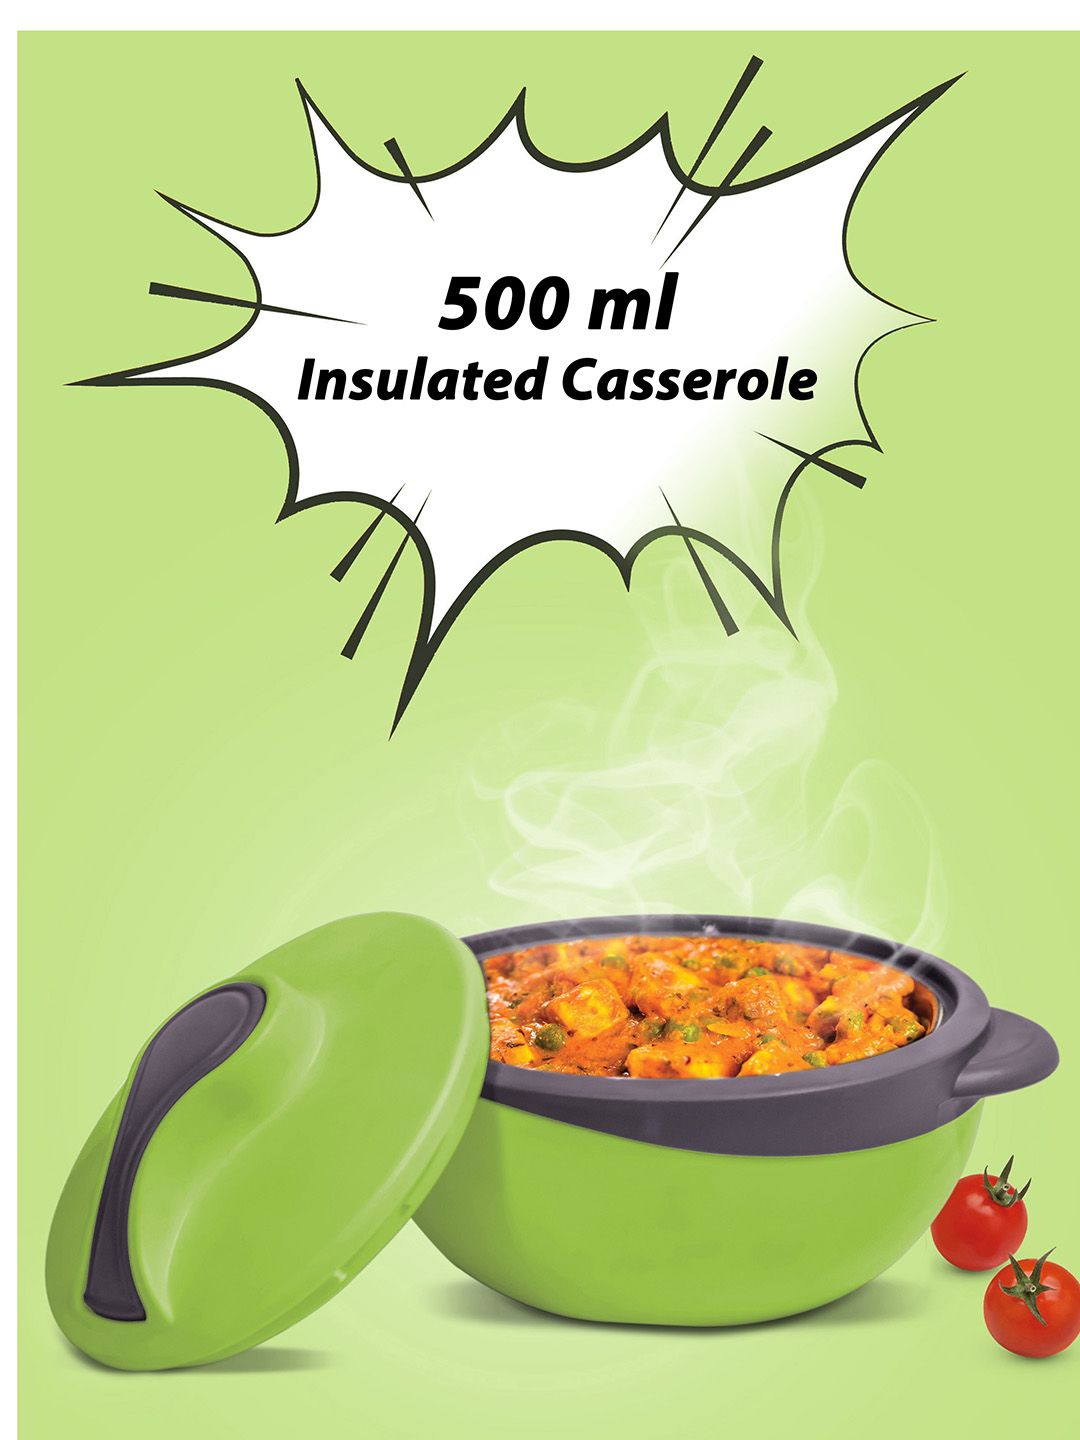 Crown Craft Green Solid Double Walled Casserole Price in India